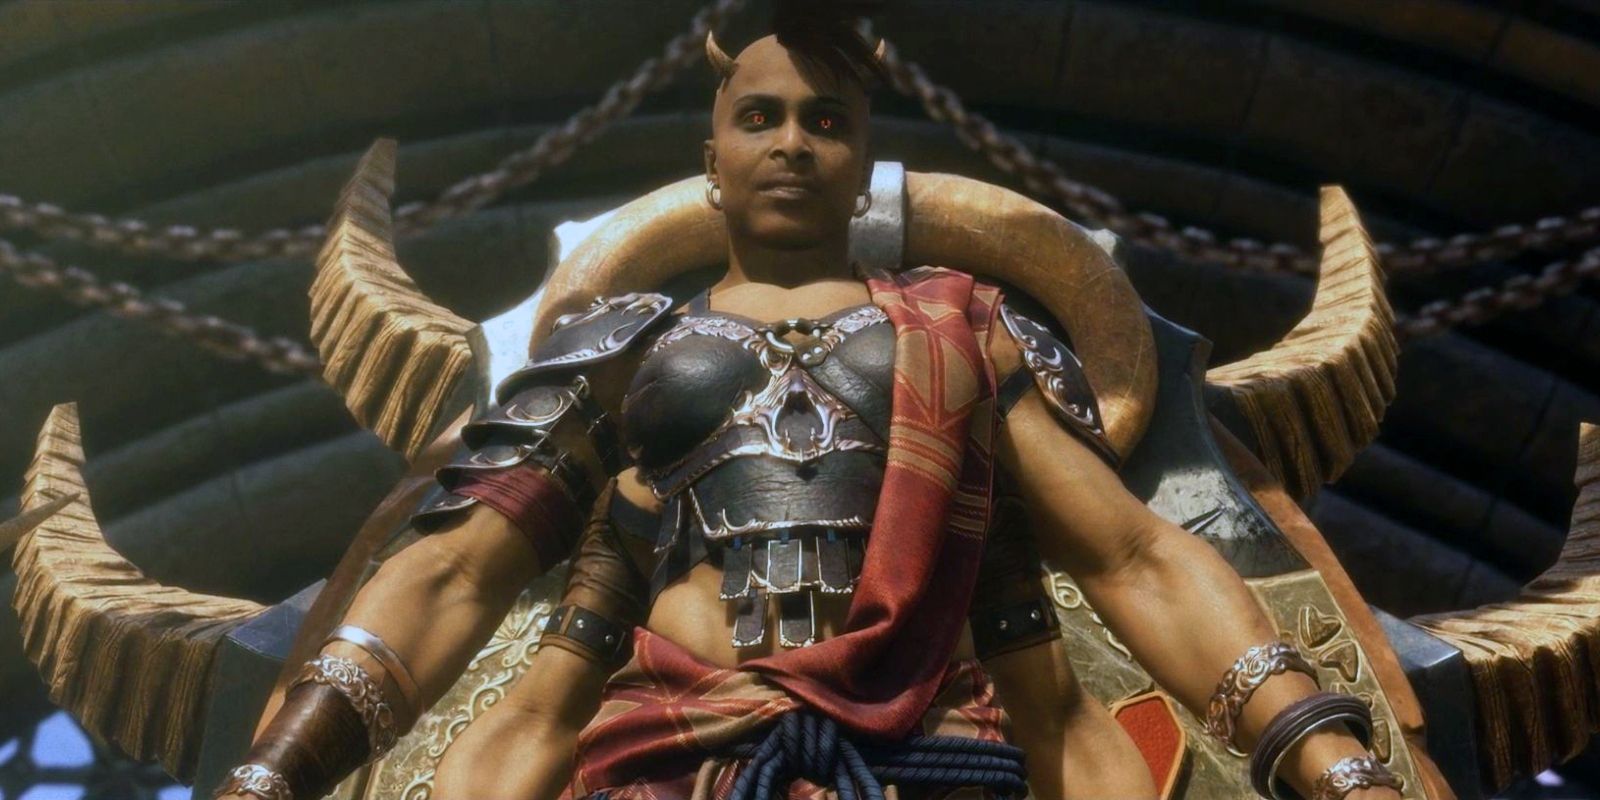 Sheeva looks down on a vanquished opponent in Mortal Kombat 11